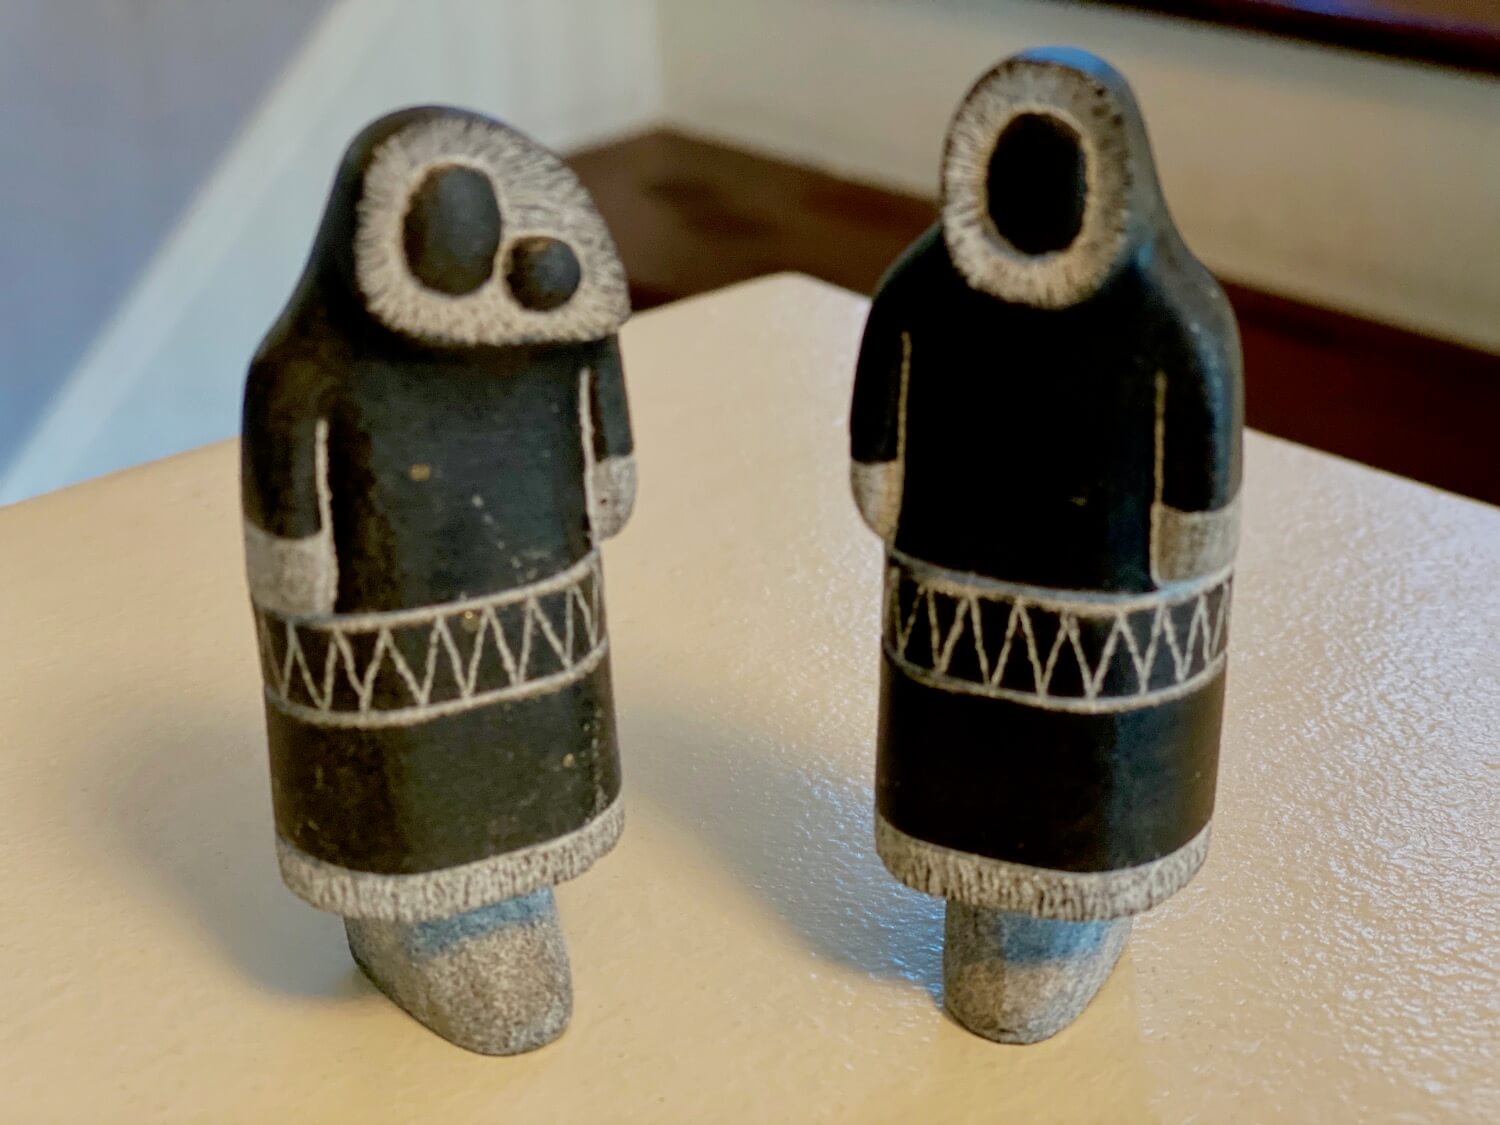 An inuit couple, man and woman with baby carved from soapstone. The carving is done by a local Greenlandic artist in a way that shows black covered outer coats with lighter animal fur fringe around the faces hands and feet areas. These two small figures come from Nuuk in Greenland.